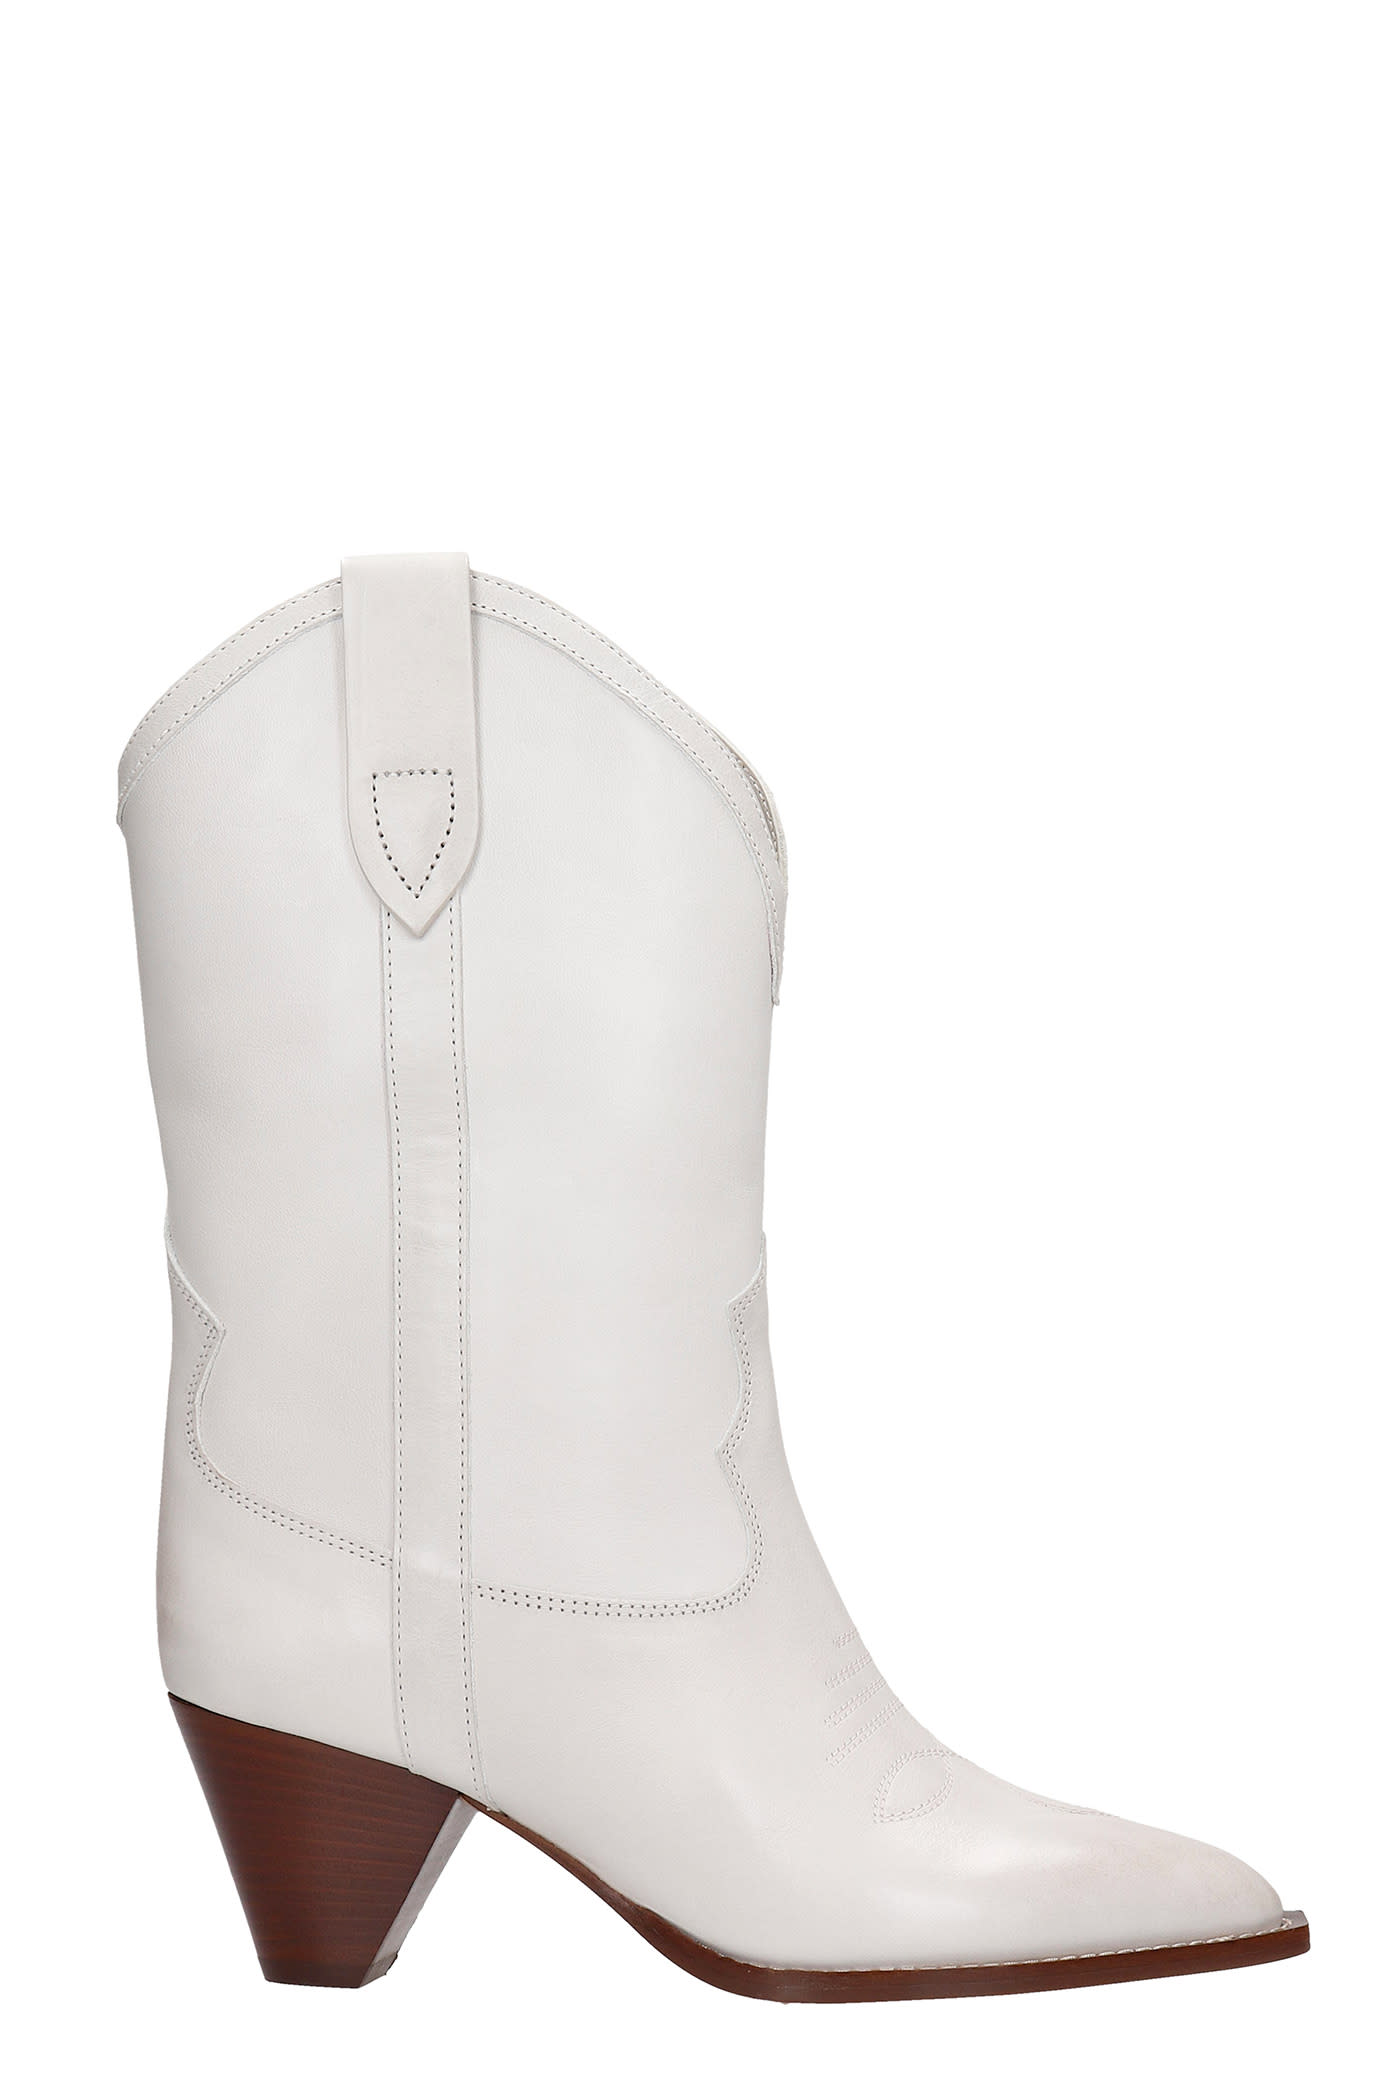 Buy Isabel Marant Luliette Texan Ankle Boots In White Leather online, shop Isabel Marant shoes with free shipping